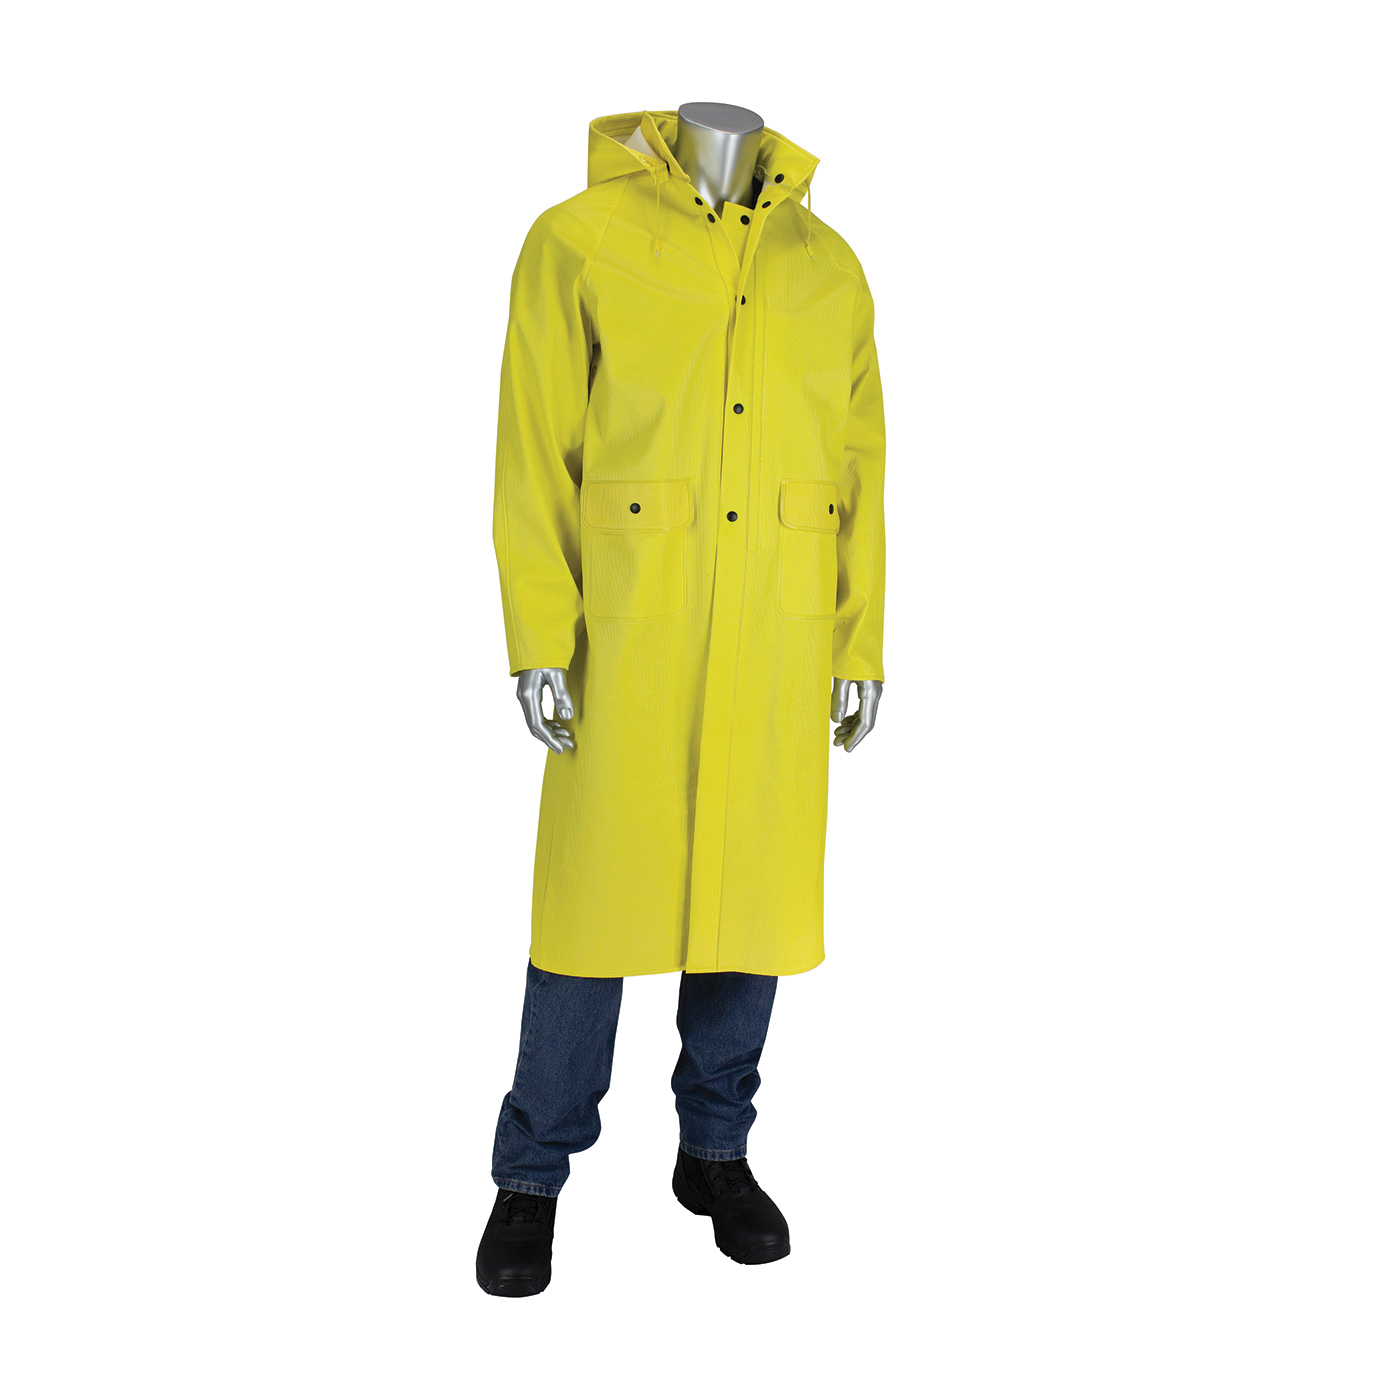 PIP® FALCON™ Flex™ 201-650C/4X 2-Piece Ribbed Rain Jacket With Hood, 4XL, Yellow, PVC/Non-Woven Polyester, Resists: Rips, Tear and Water